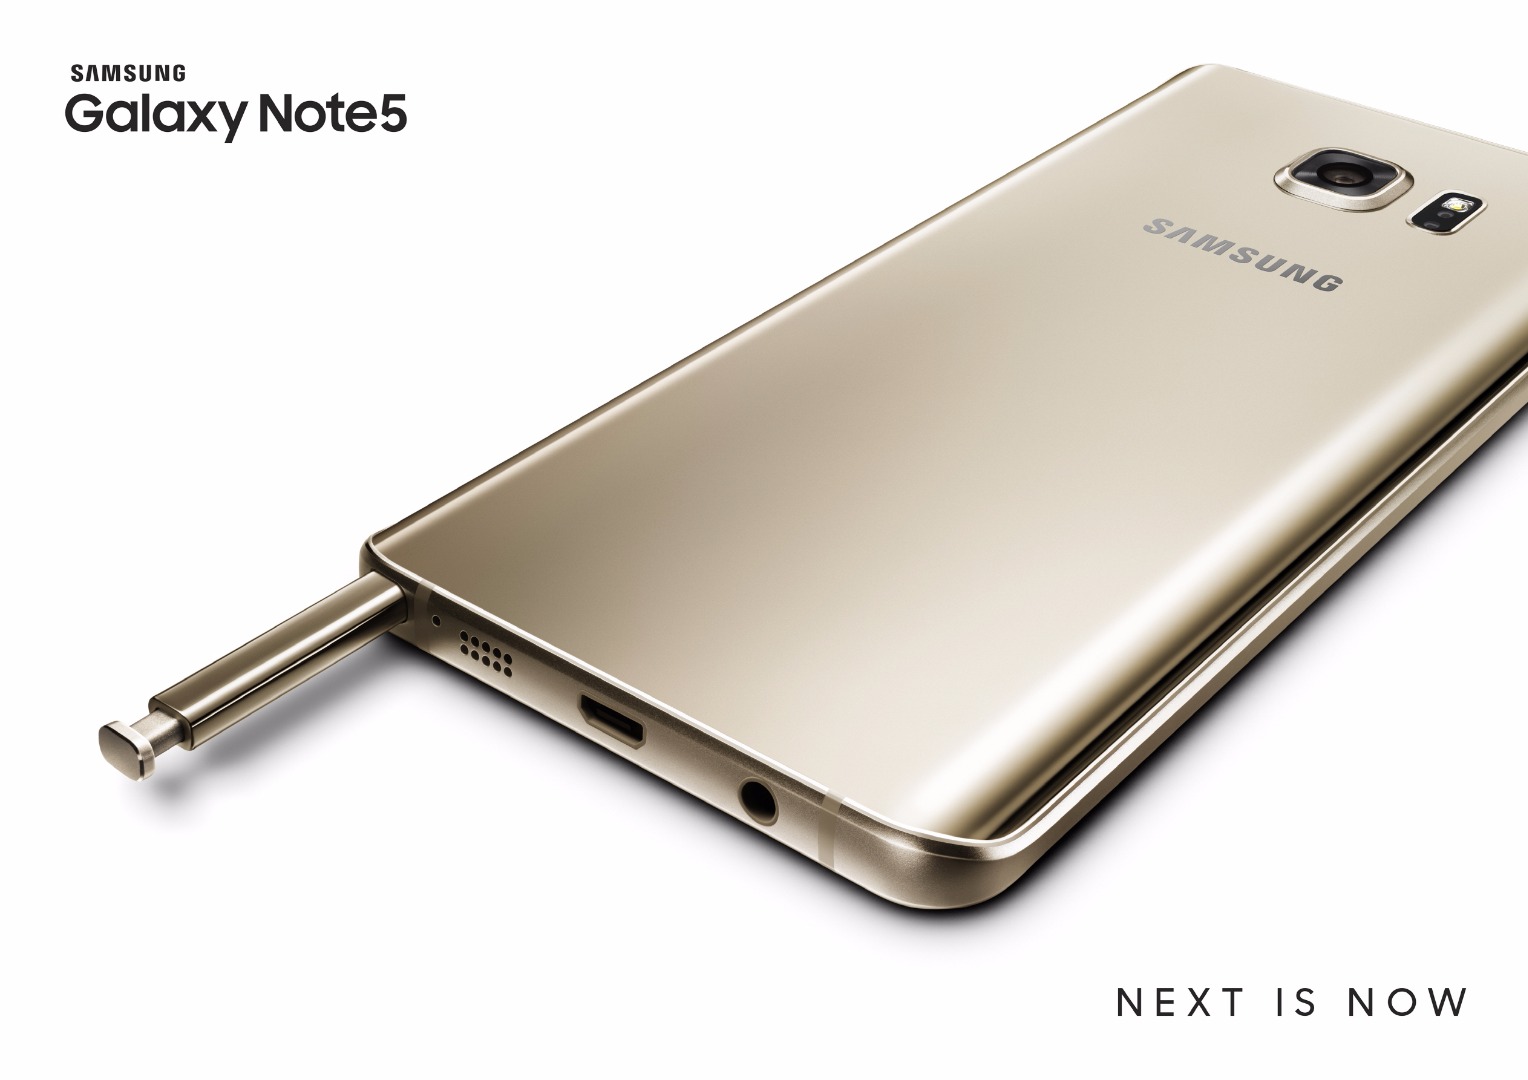 Samsung Galaxy Note Specs And Image